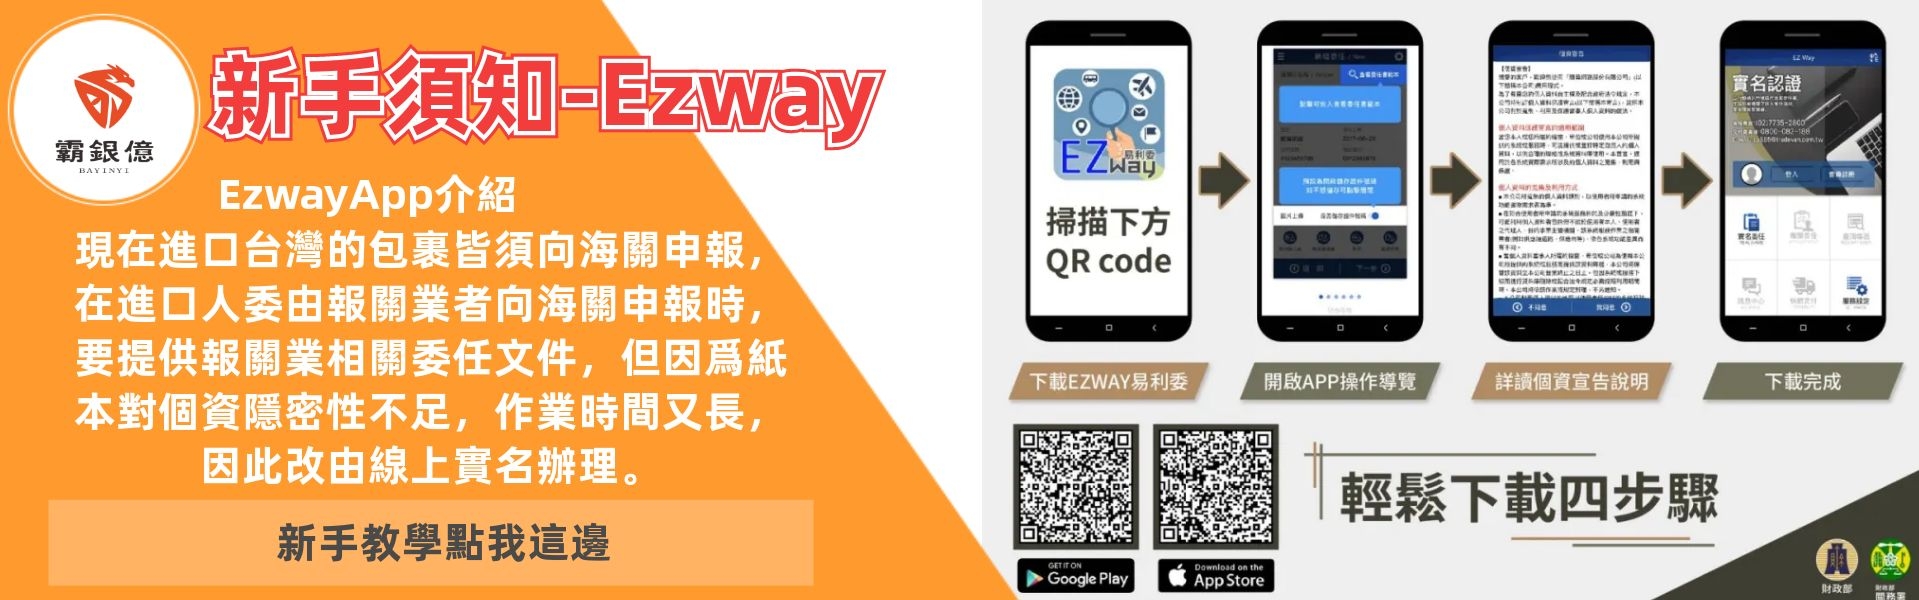 ezway